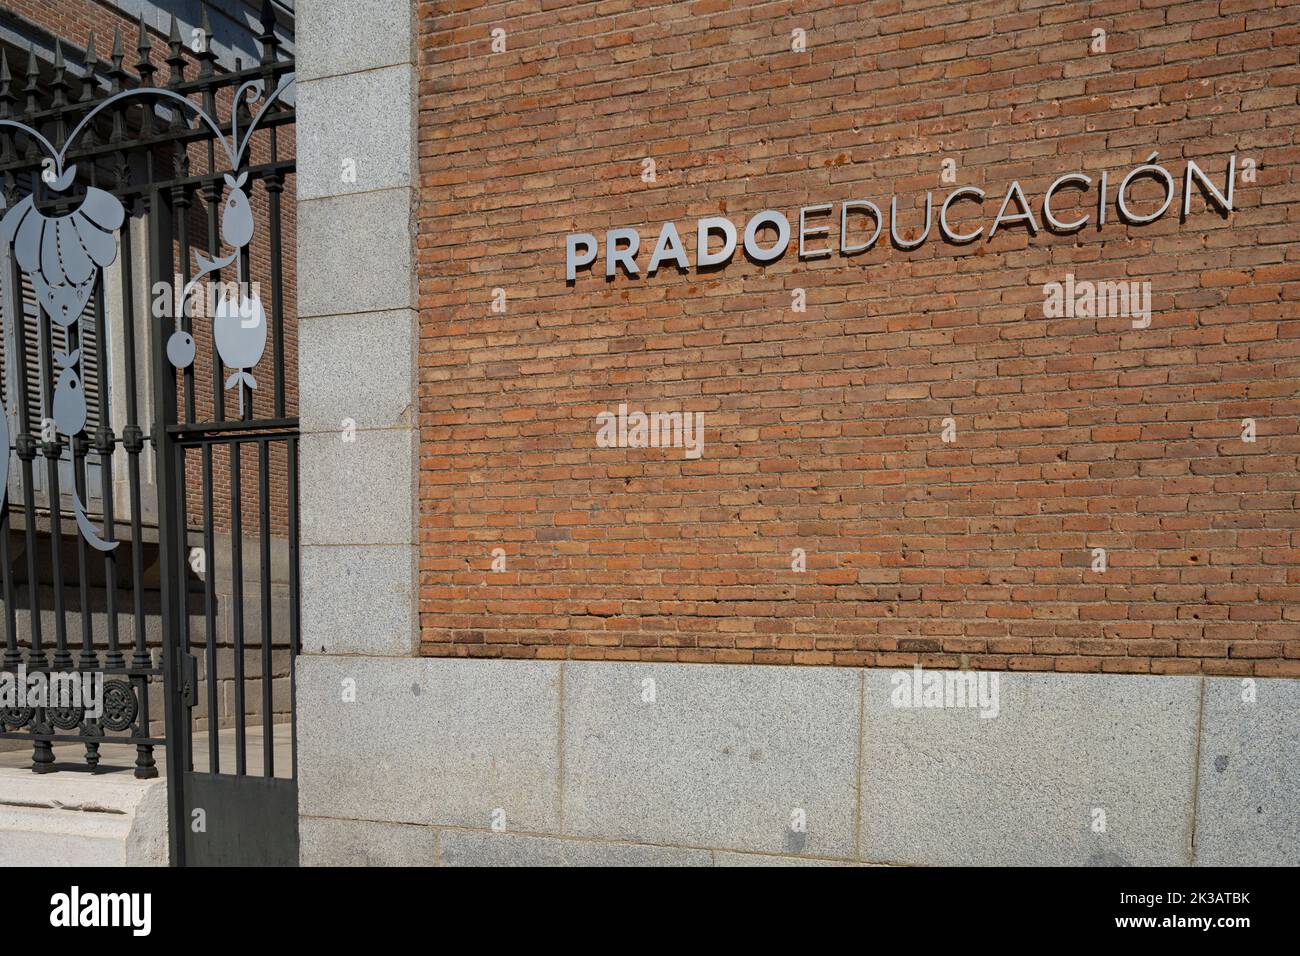 Madrid, Spain, September 2022.  Prado Educacion is a living project that aspires to be a bridge between the museum and 21st-century society. The build Stock Photo